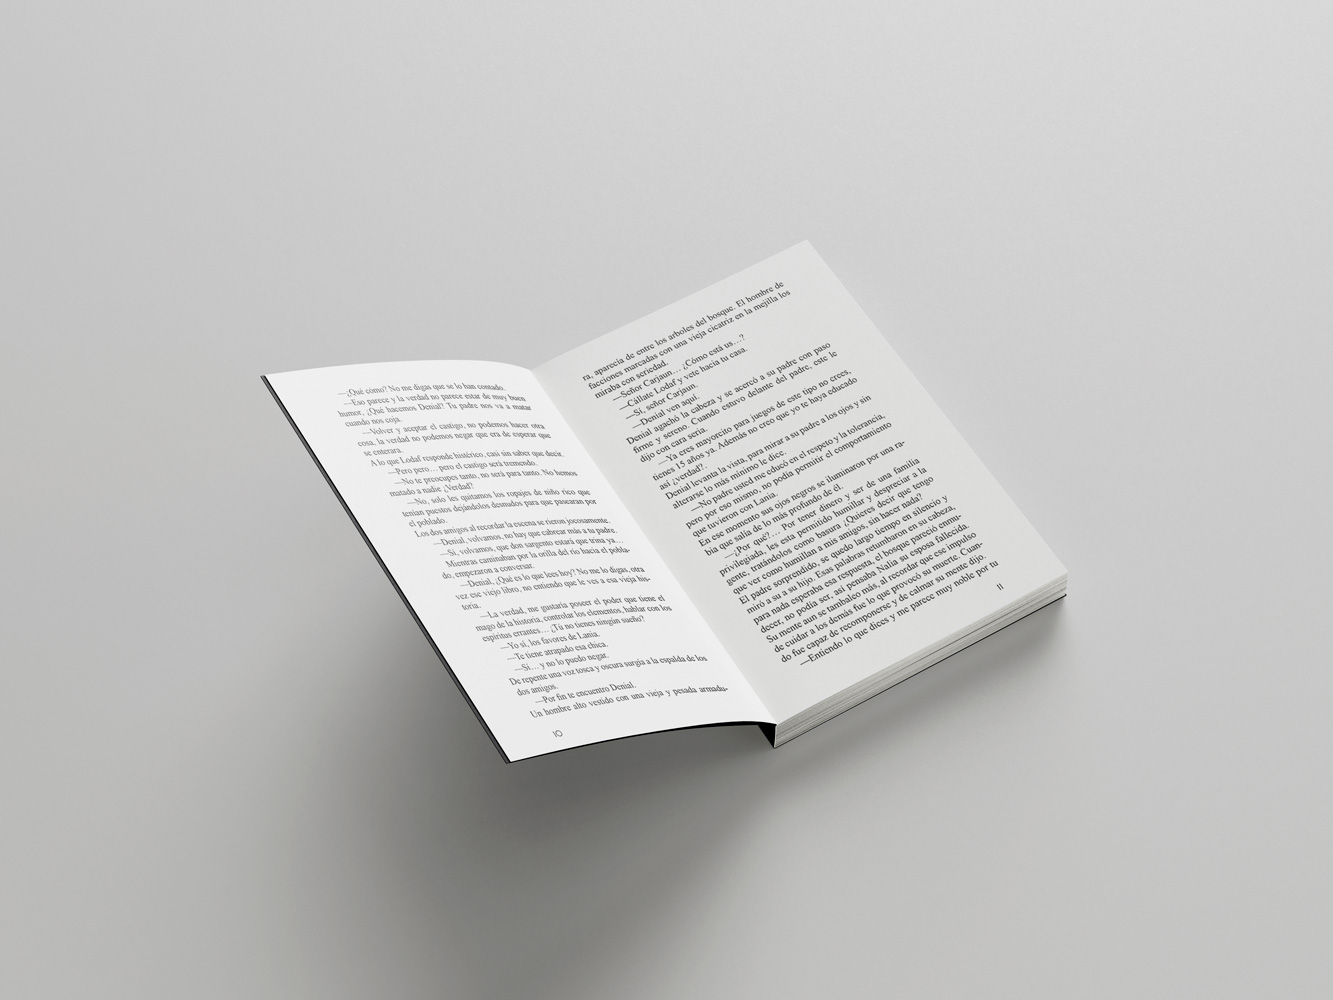 We design the layout of your book.